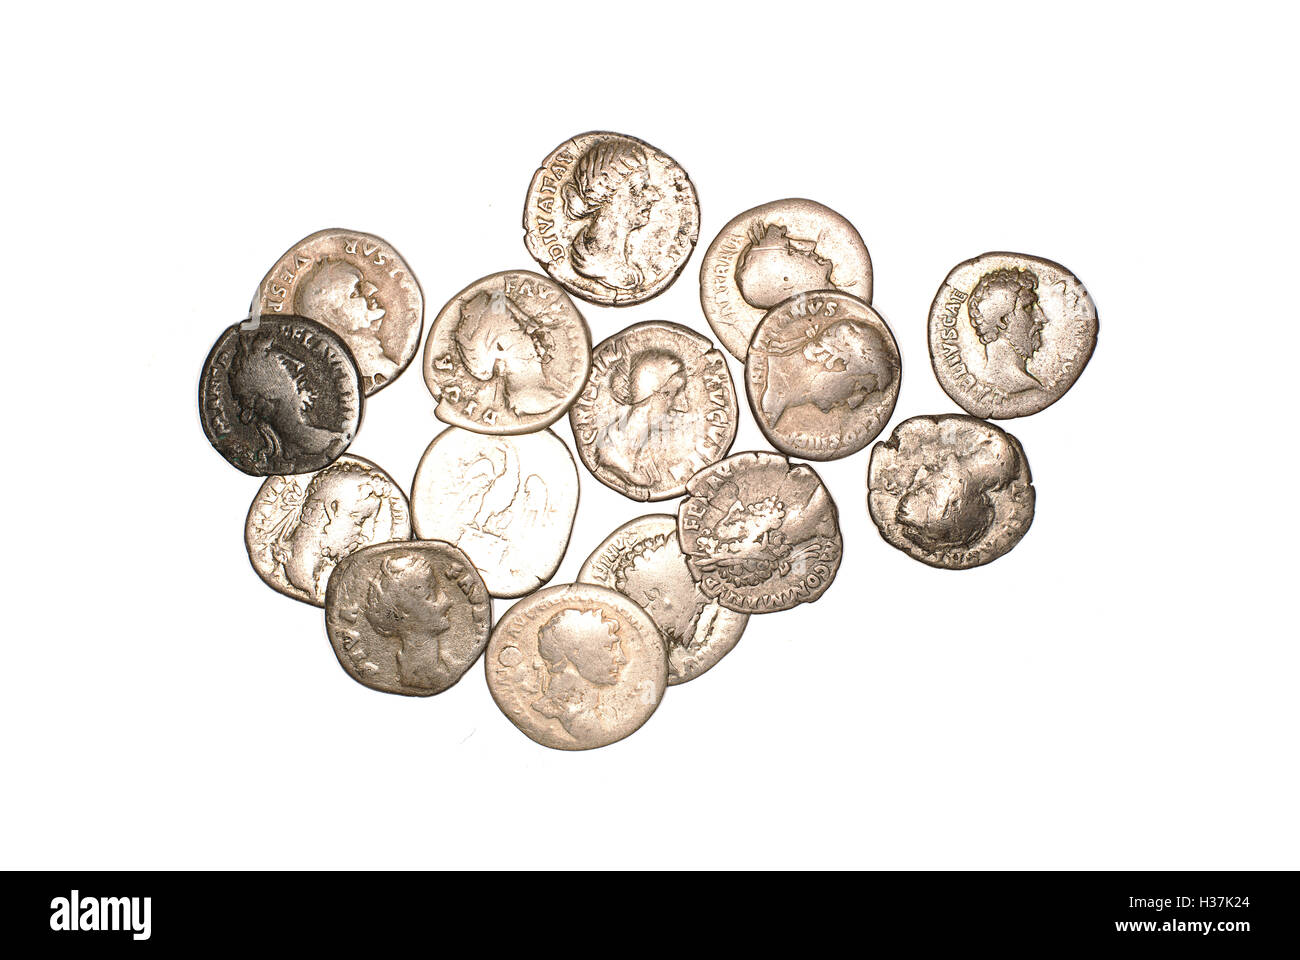 Many ancient silver coins on white Stock Photo